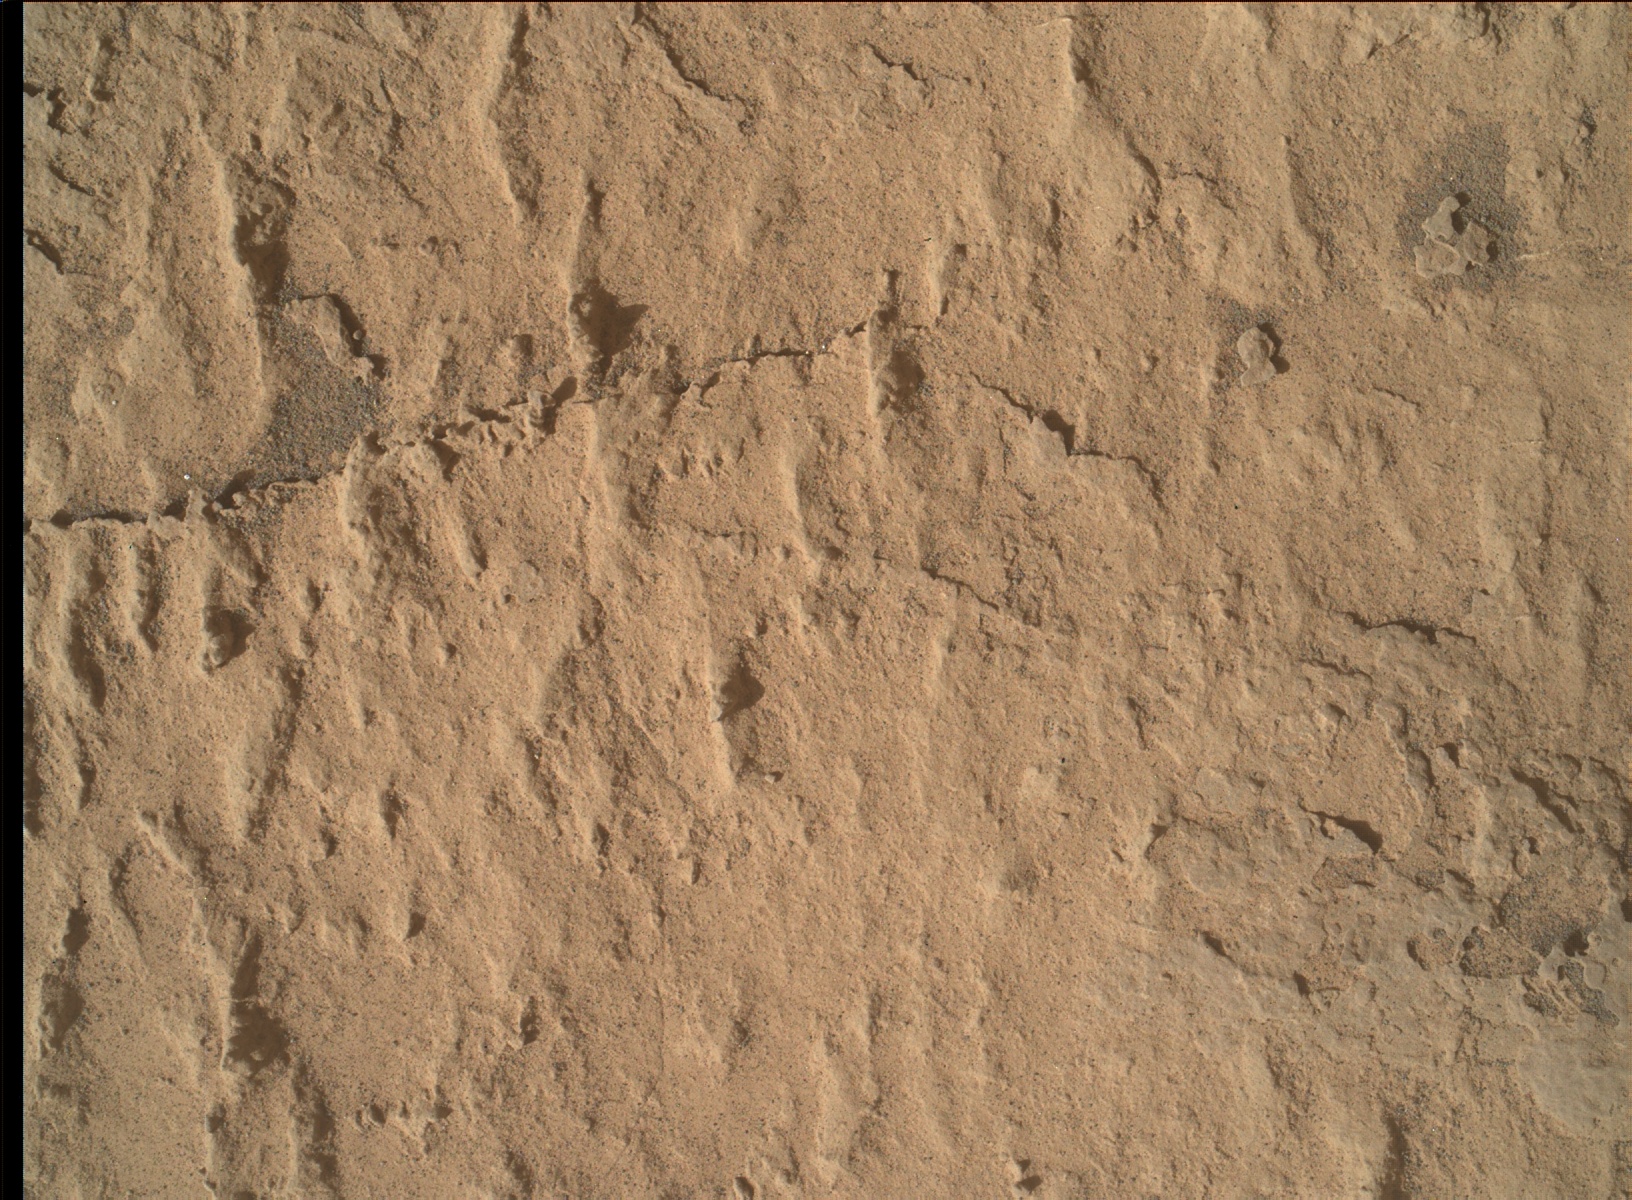 Nasa's Mars rover Curiosity acquired this image using its Mars Hand Lens Imager (MAHLI) on Sol 3168